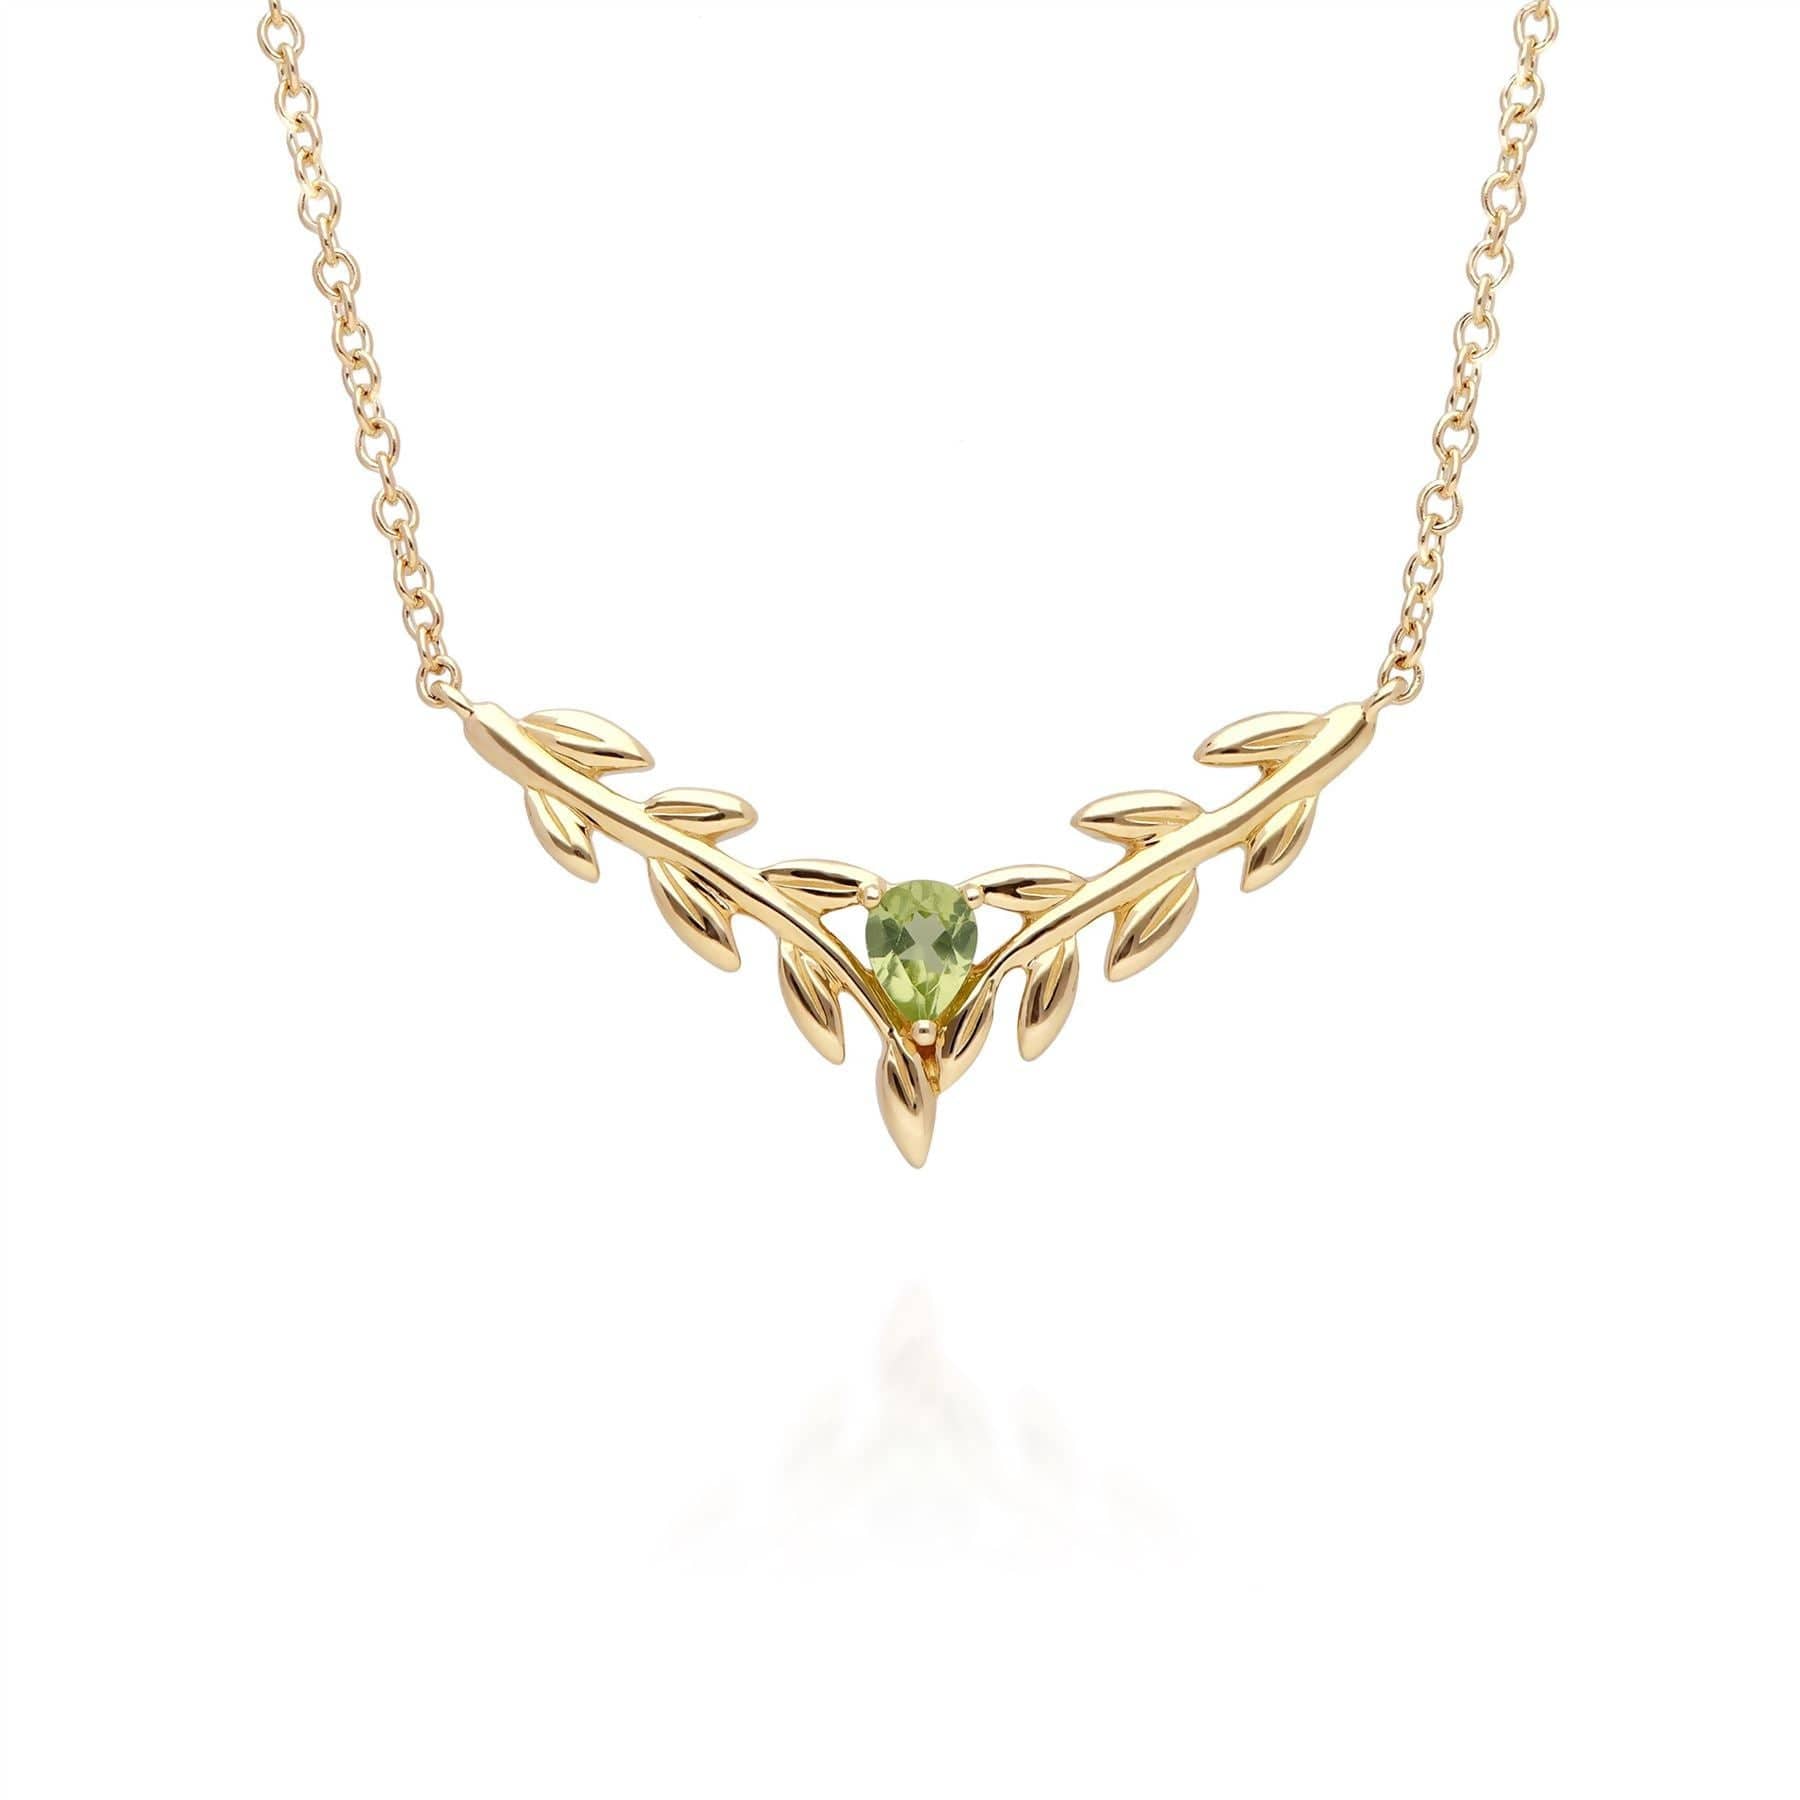 O Leaf Peridot Necklace & Stud Earring Set in 9ct Yellow Gold - Gemondo